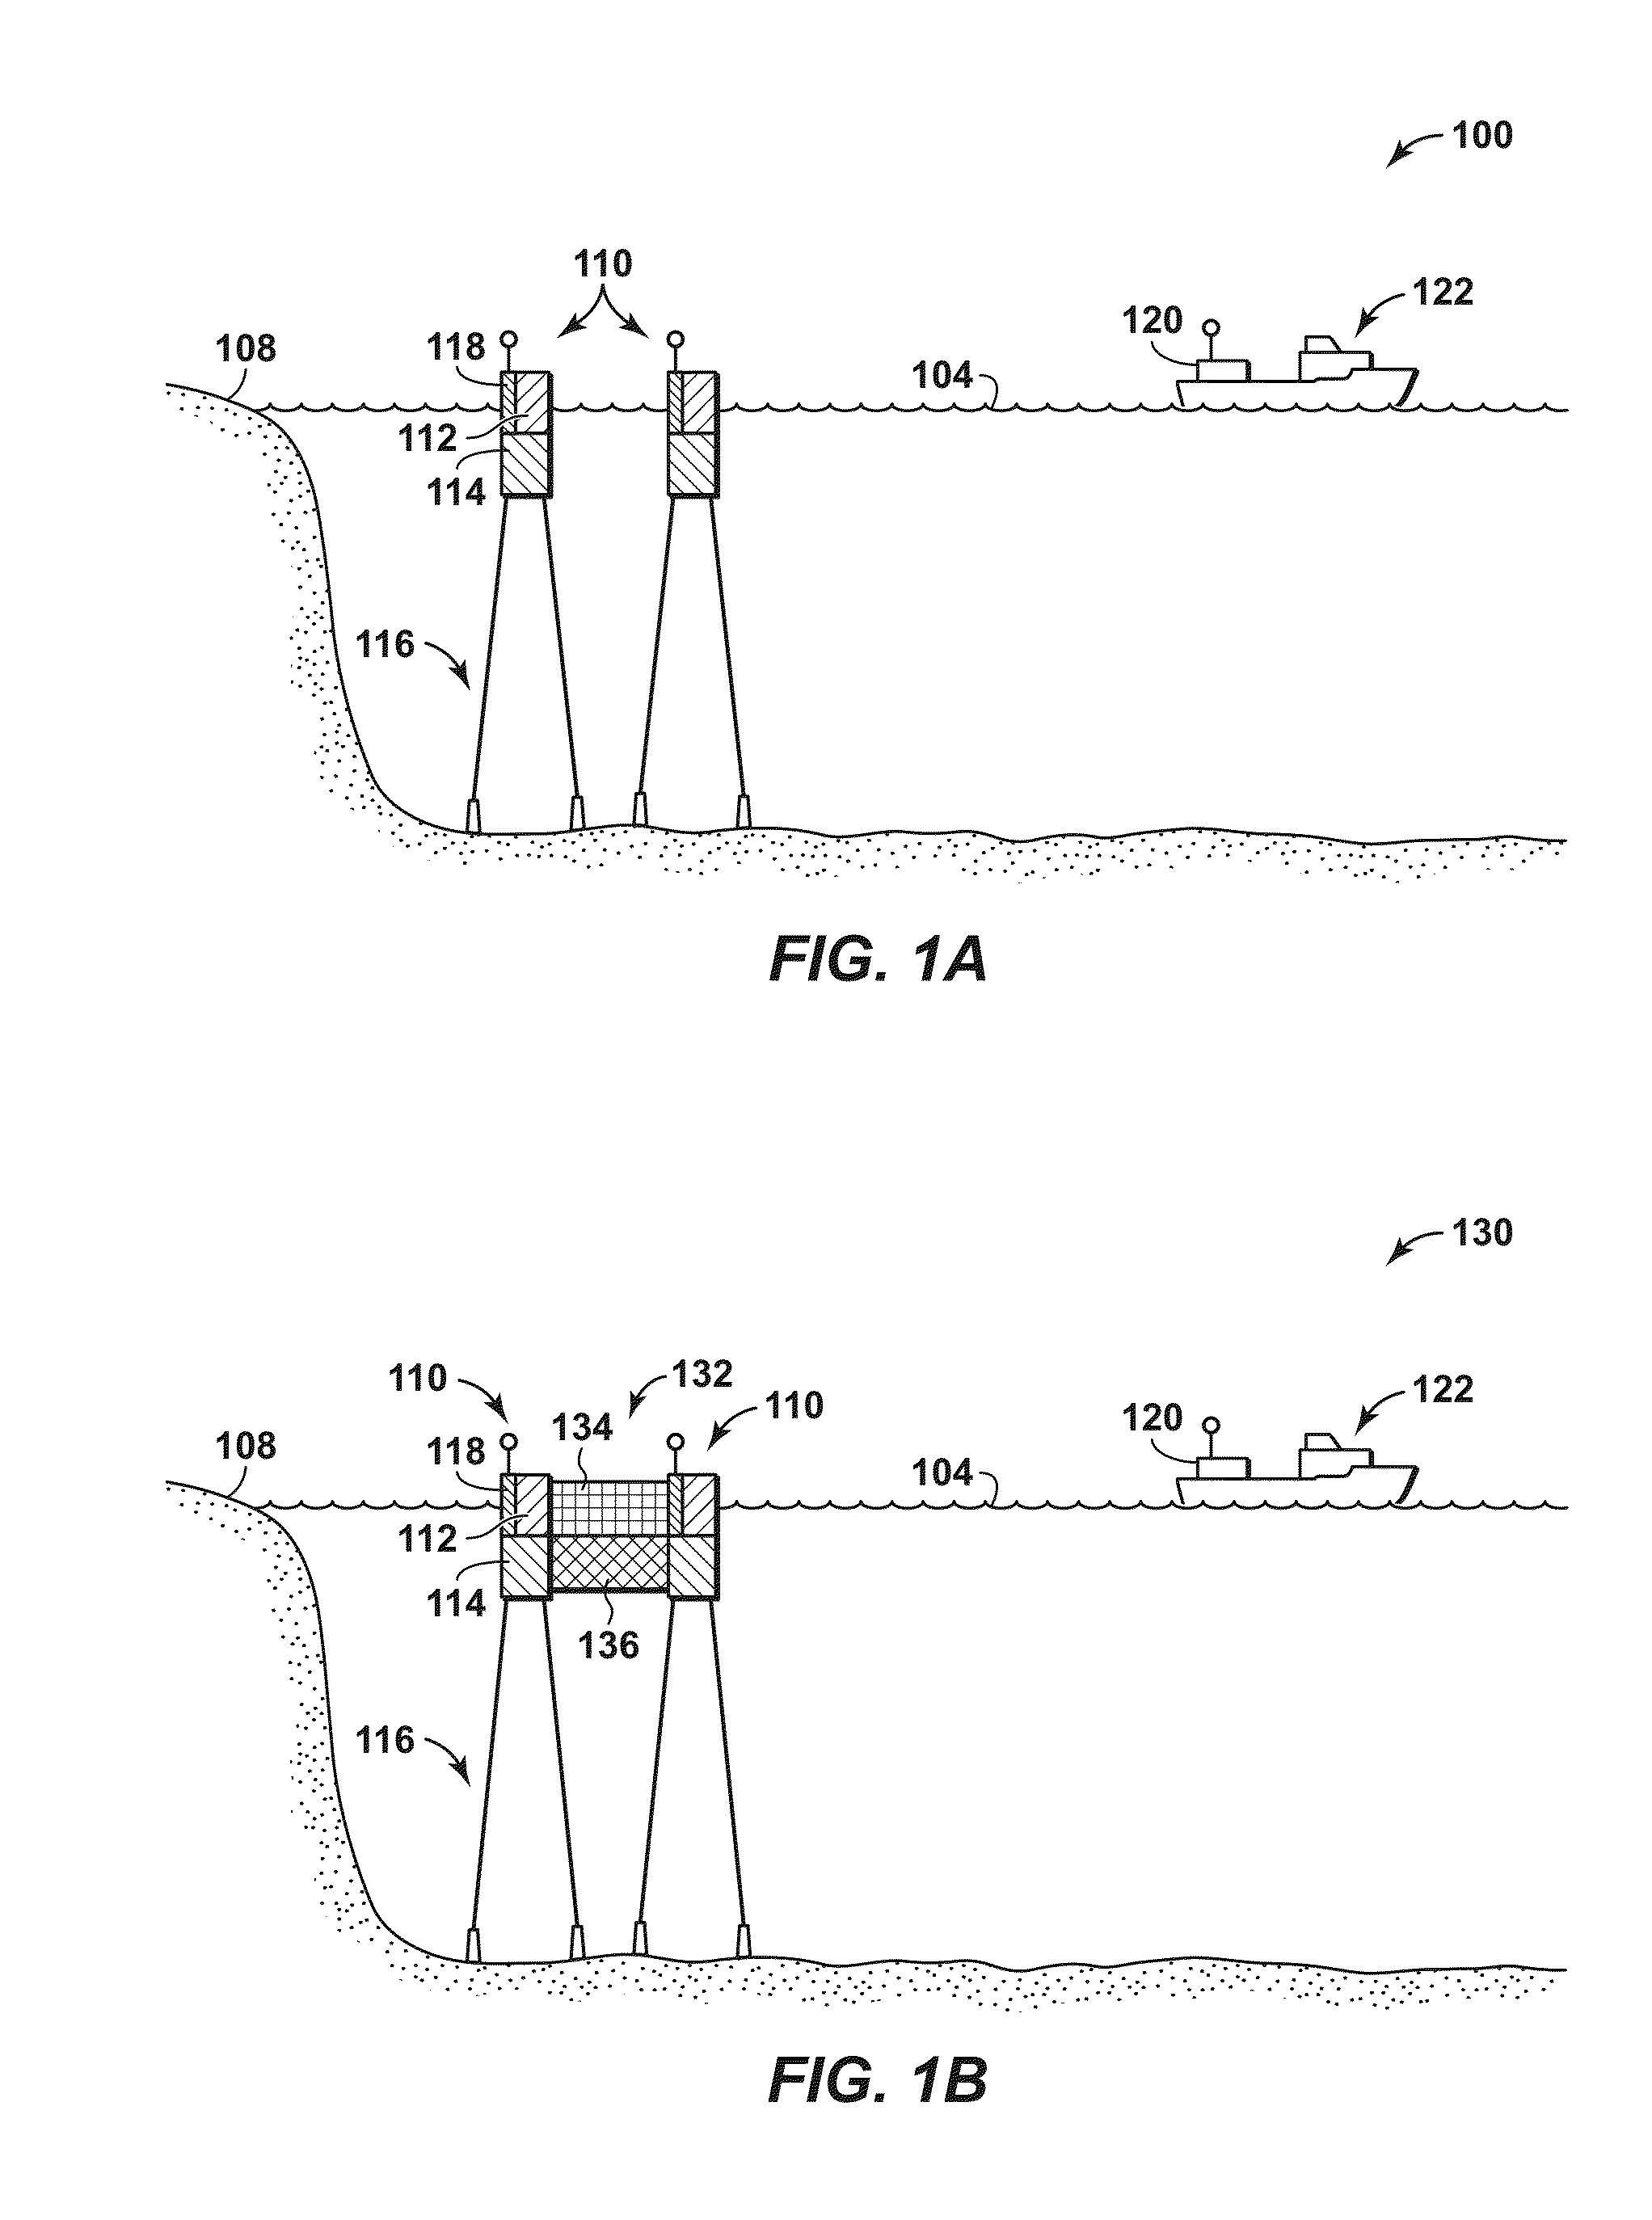 Method and System For Identifying And Sampling Hydrocarbons With Buoys